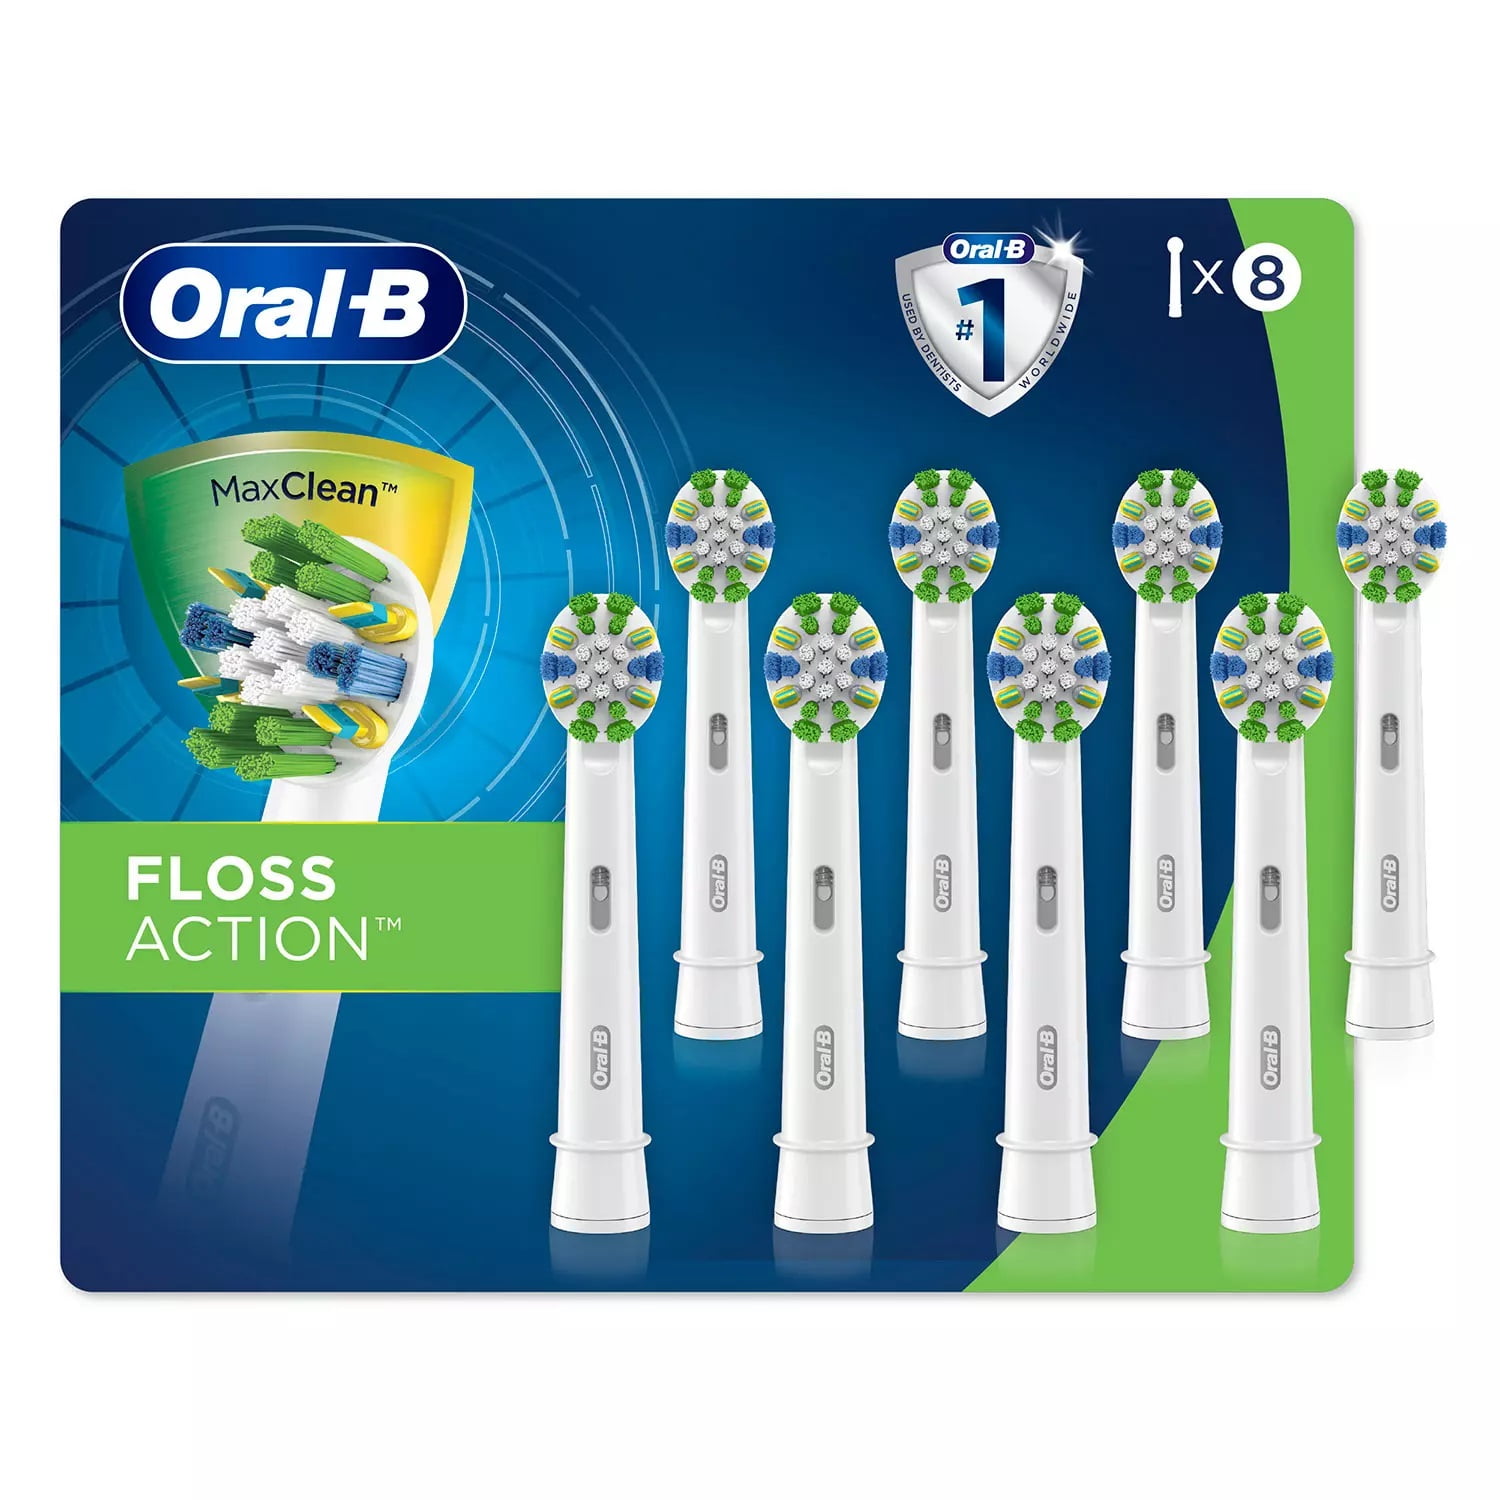 Oral-B FlossAction Toothbrush Replacement Brush Heads, Floss Action ct. Refills) - Walmart.com